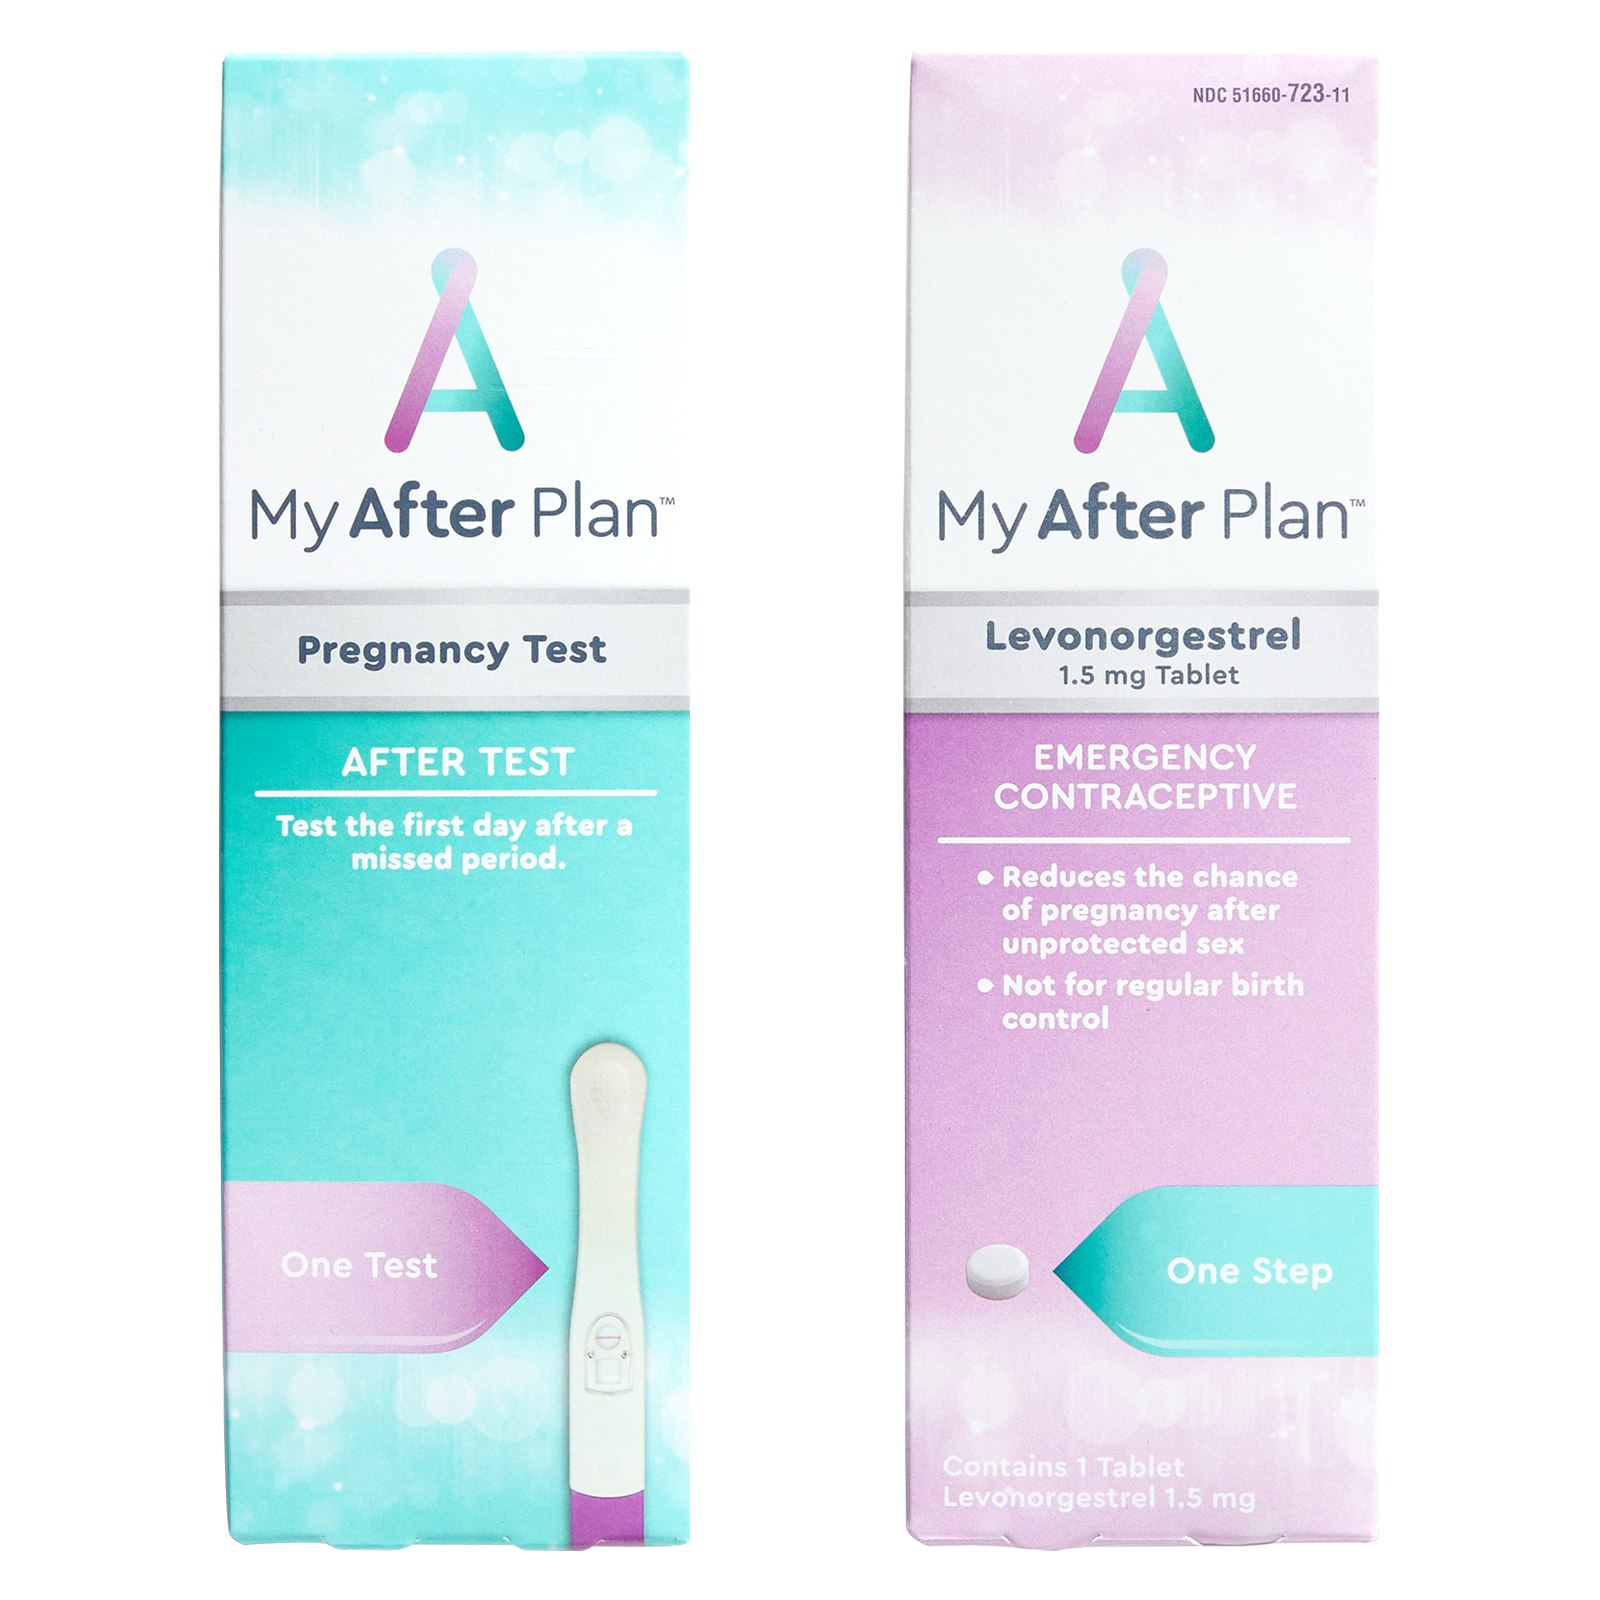 My After Plan Emergency Contraceptive Pill & Pregnancy Test